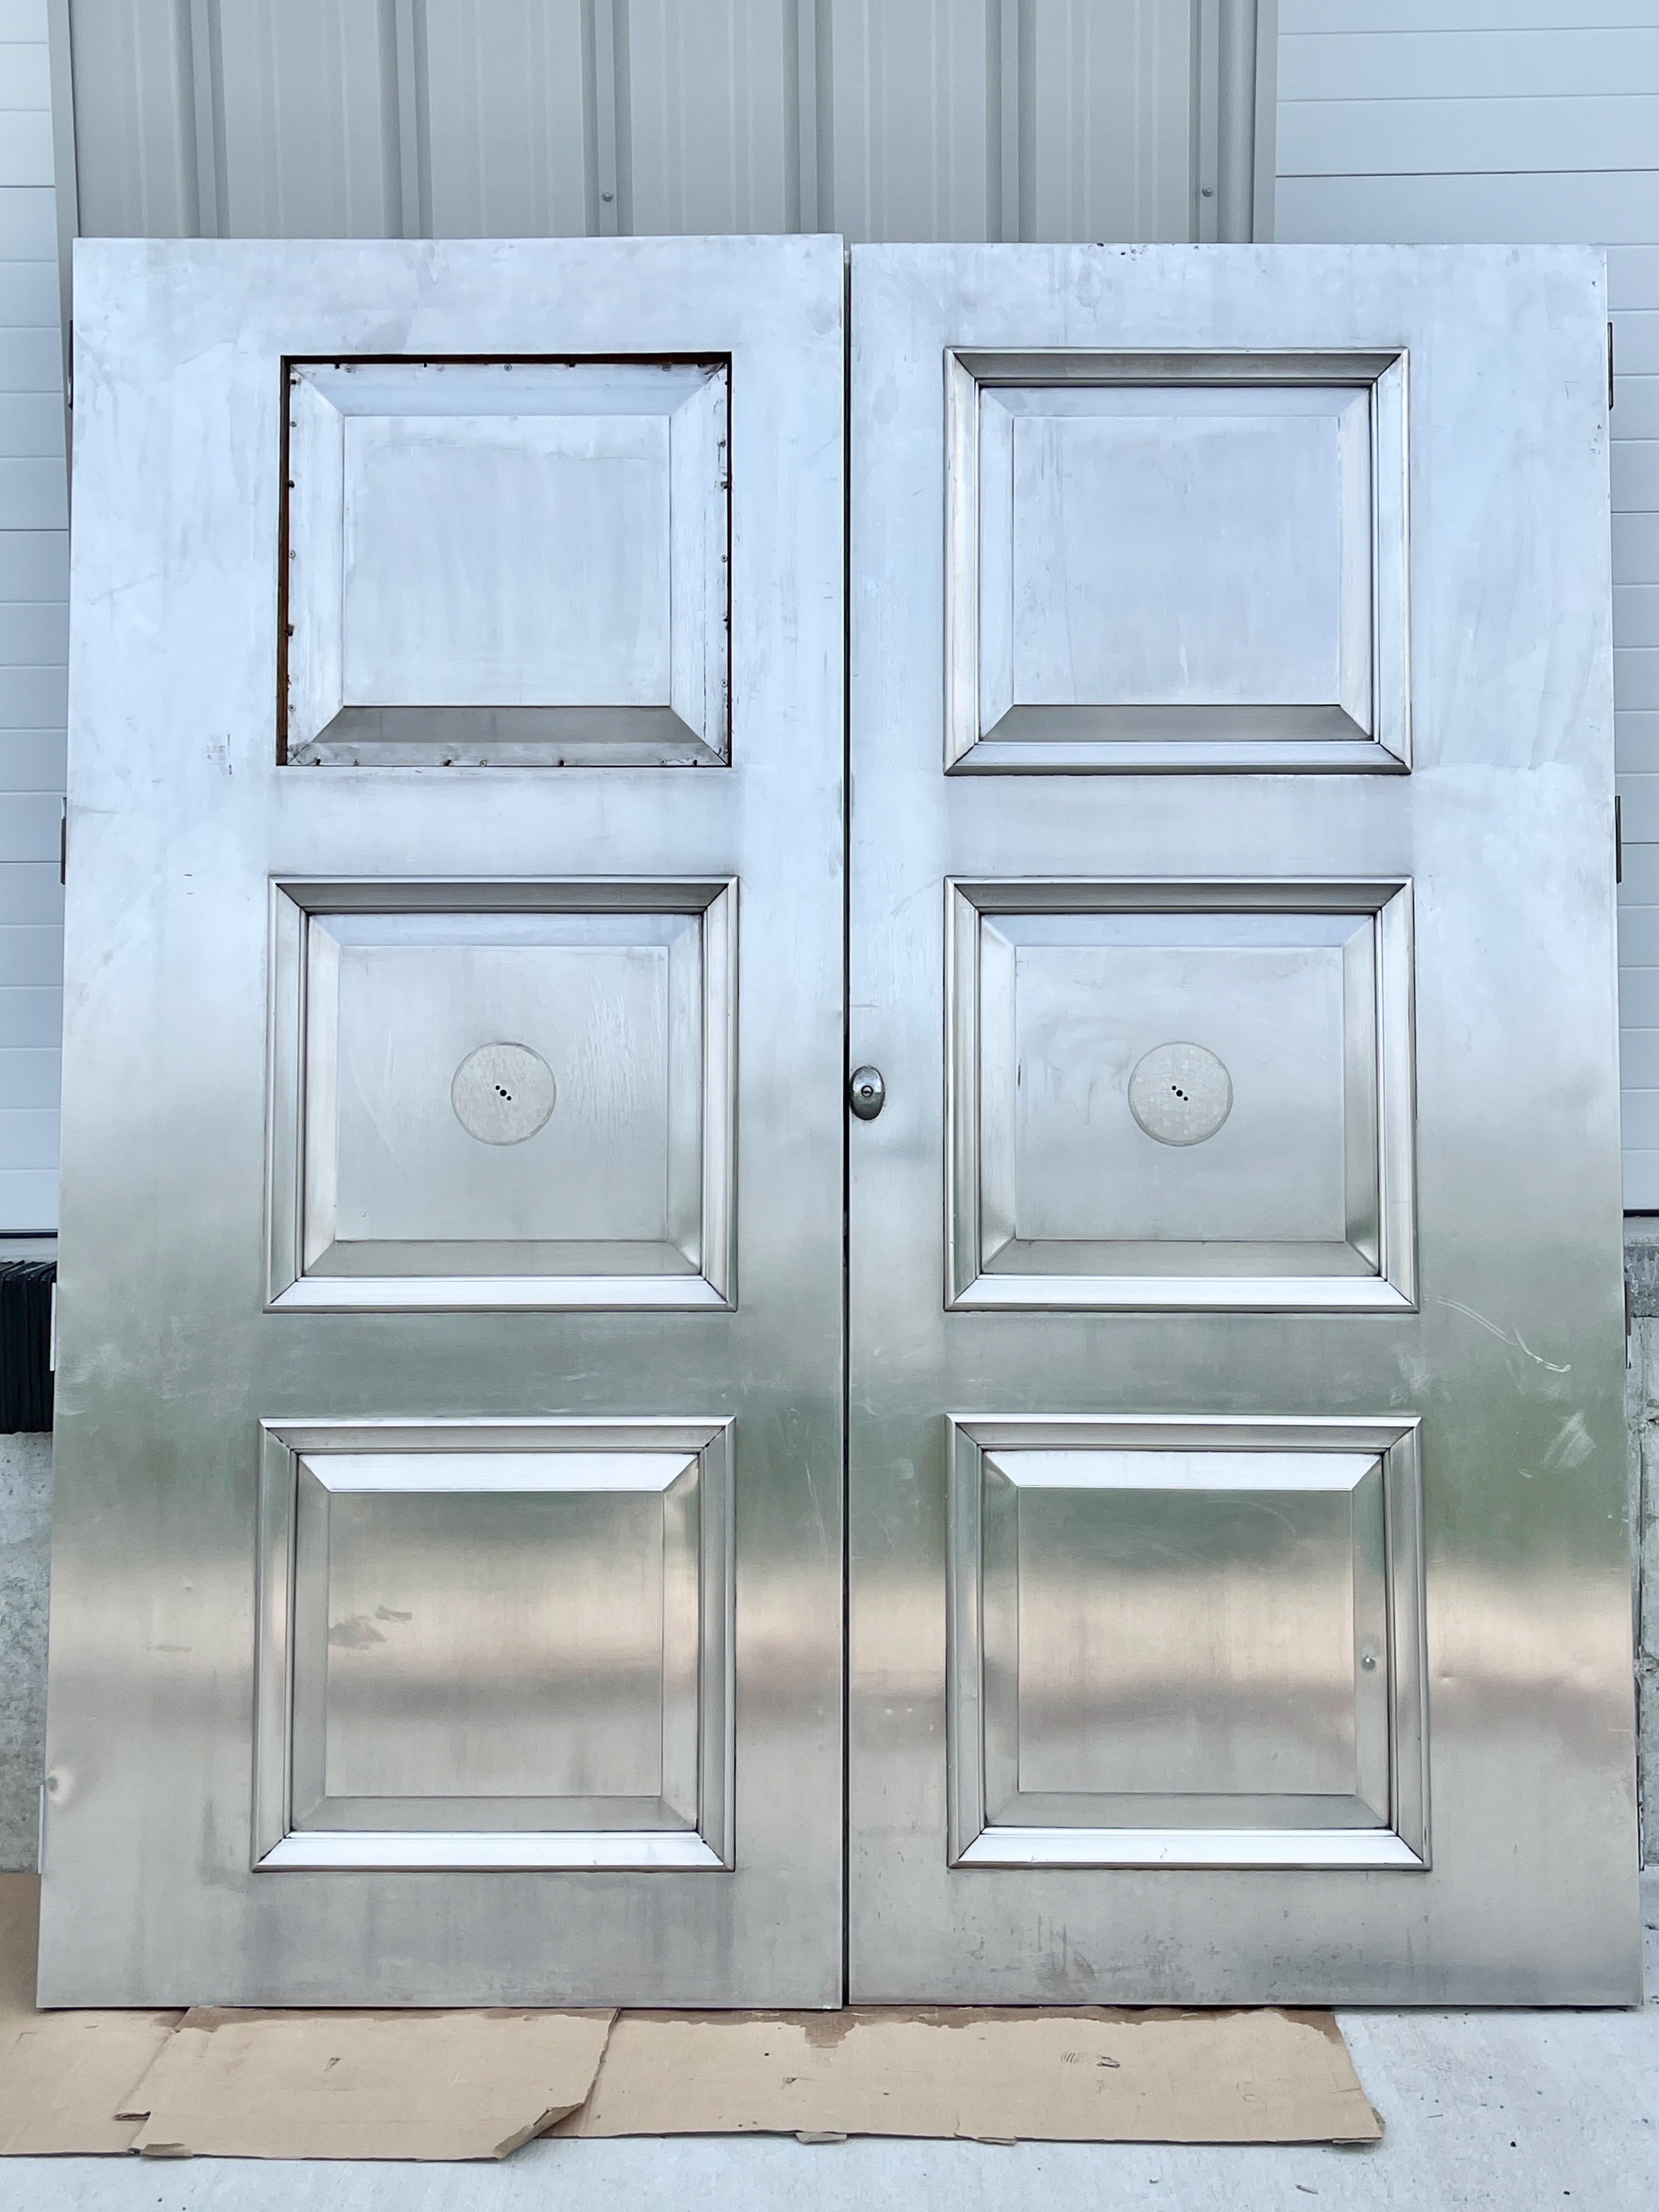 Pair of nickel-silver double entrance doors with three raised square panels, hinges and lock. 
Similar to main entrance doors of Tiffany & Co. but origins unknown.
Sheet metal is very heavy gauge. Inner core appears to be hardwood.
Bring them back